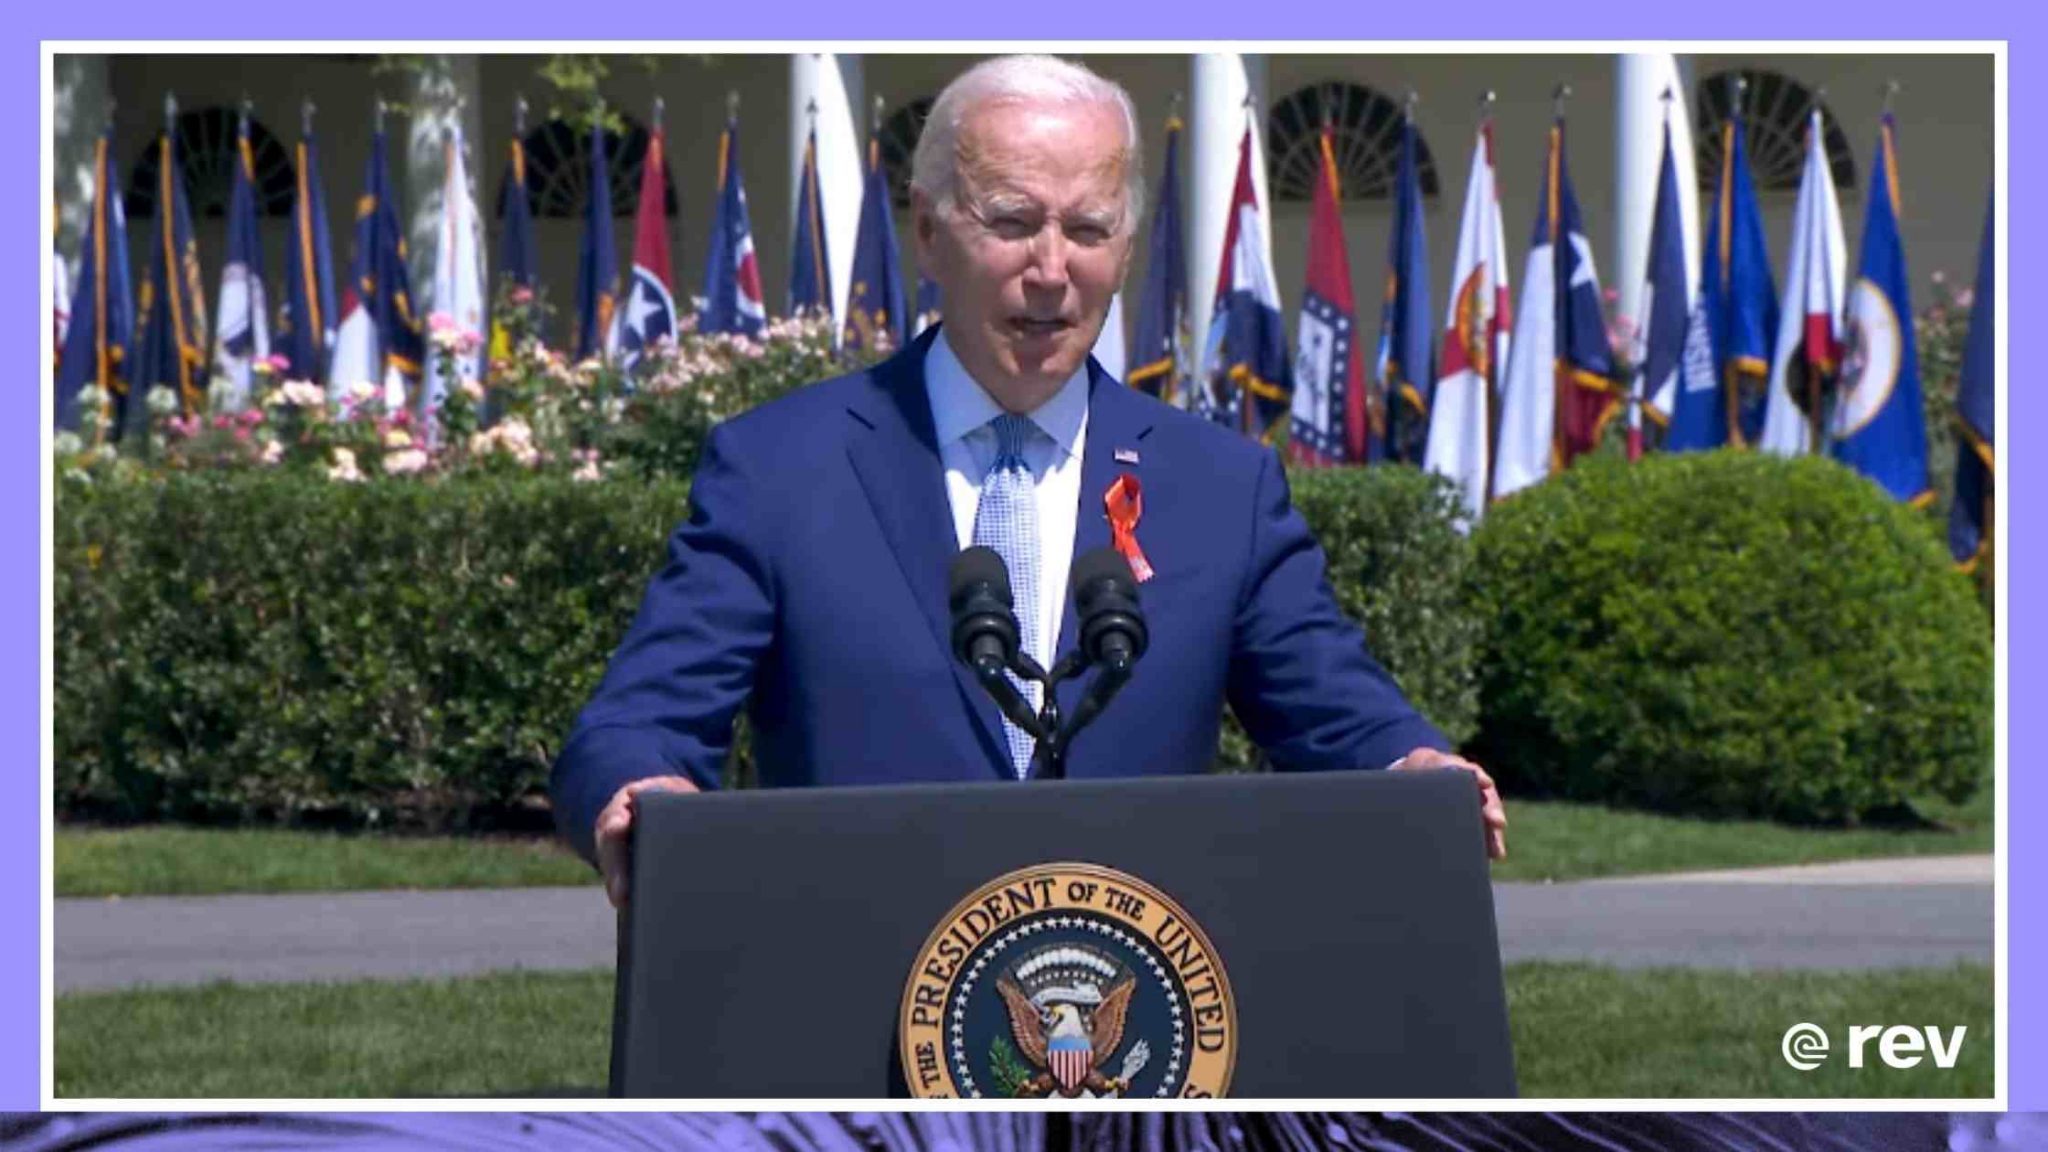 President Biden and Vice President Harris Deliver Remarks at Celebration of the Safer Community Act 7/11/22